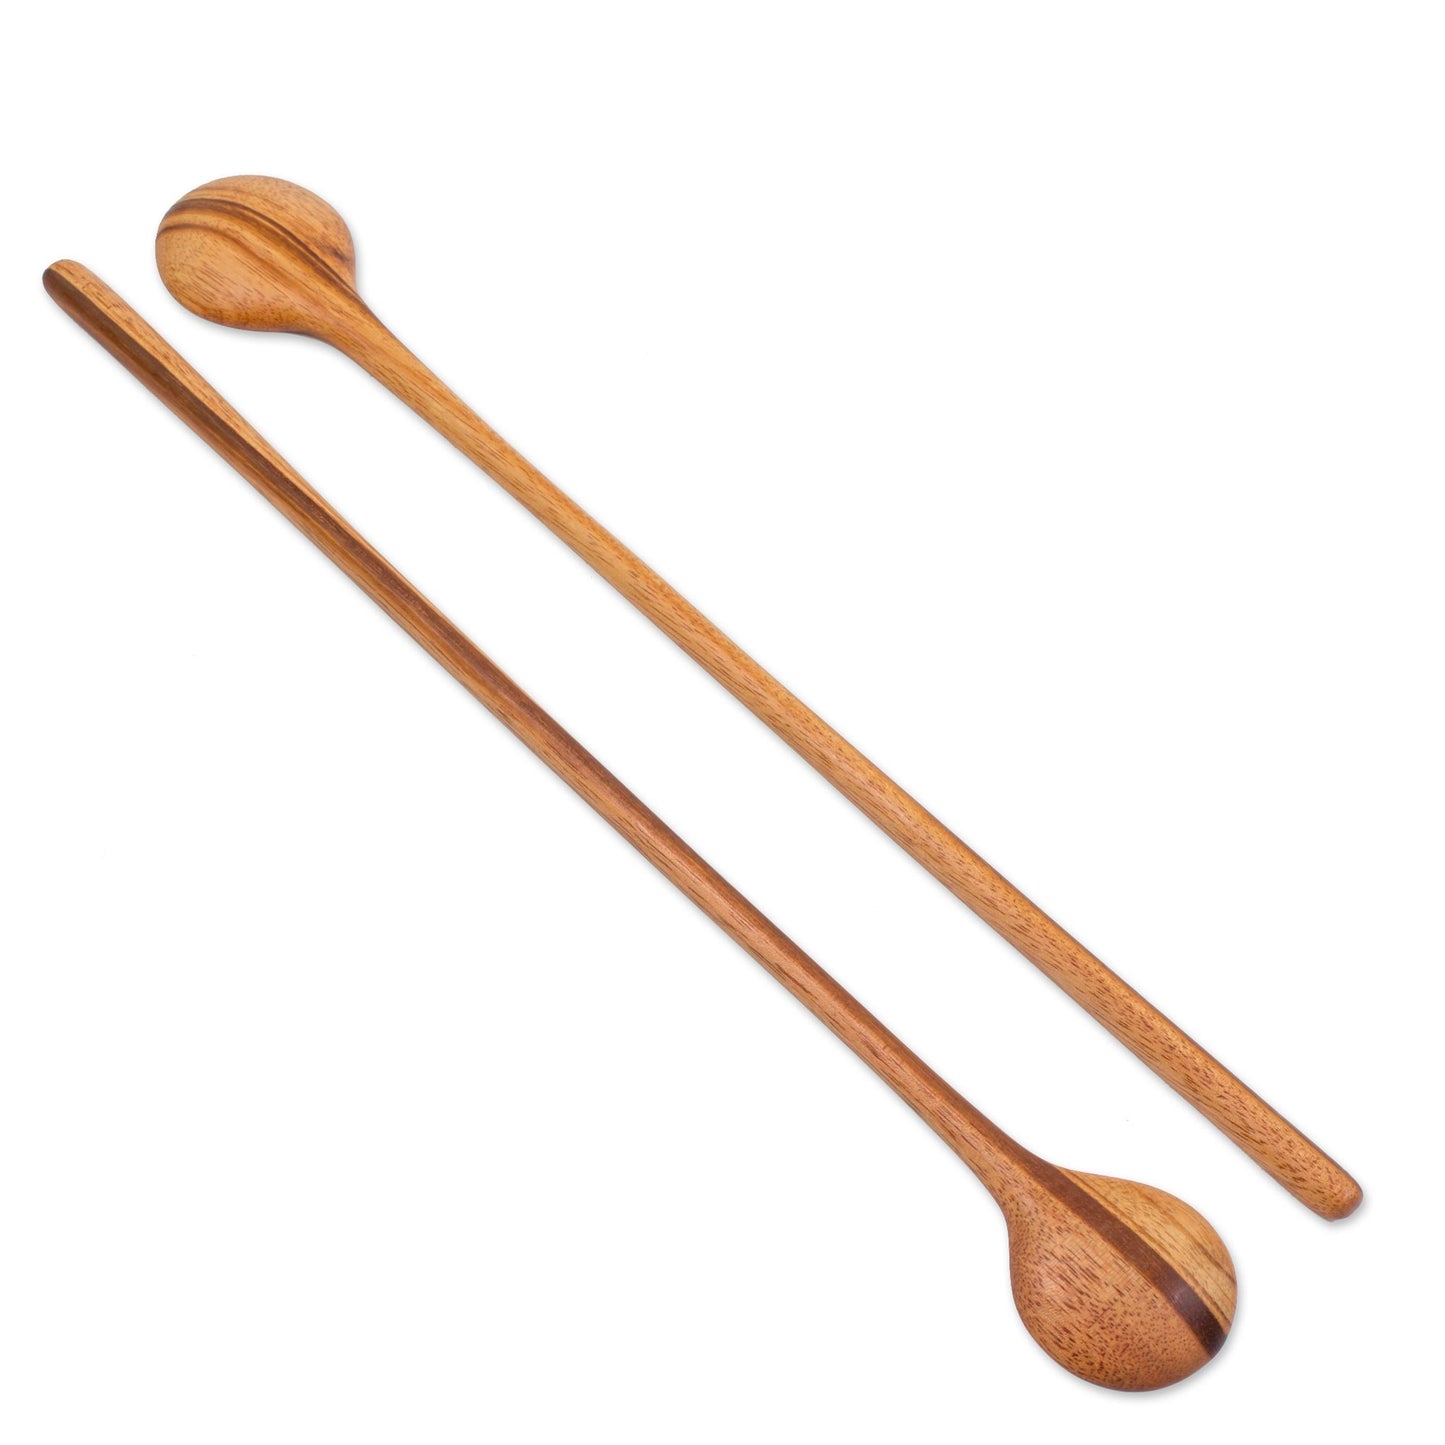 Homestyle Pair of Handmade Jobillo Wood Cooking Spoons from Guatemala